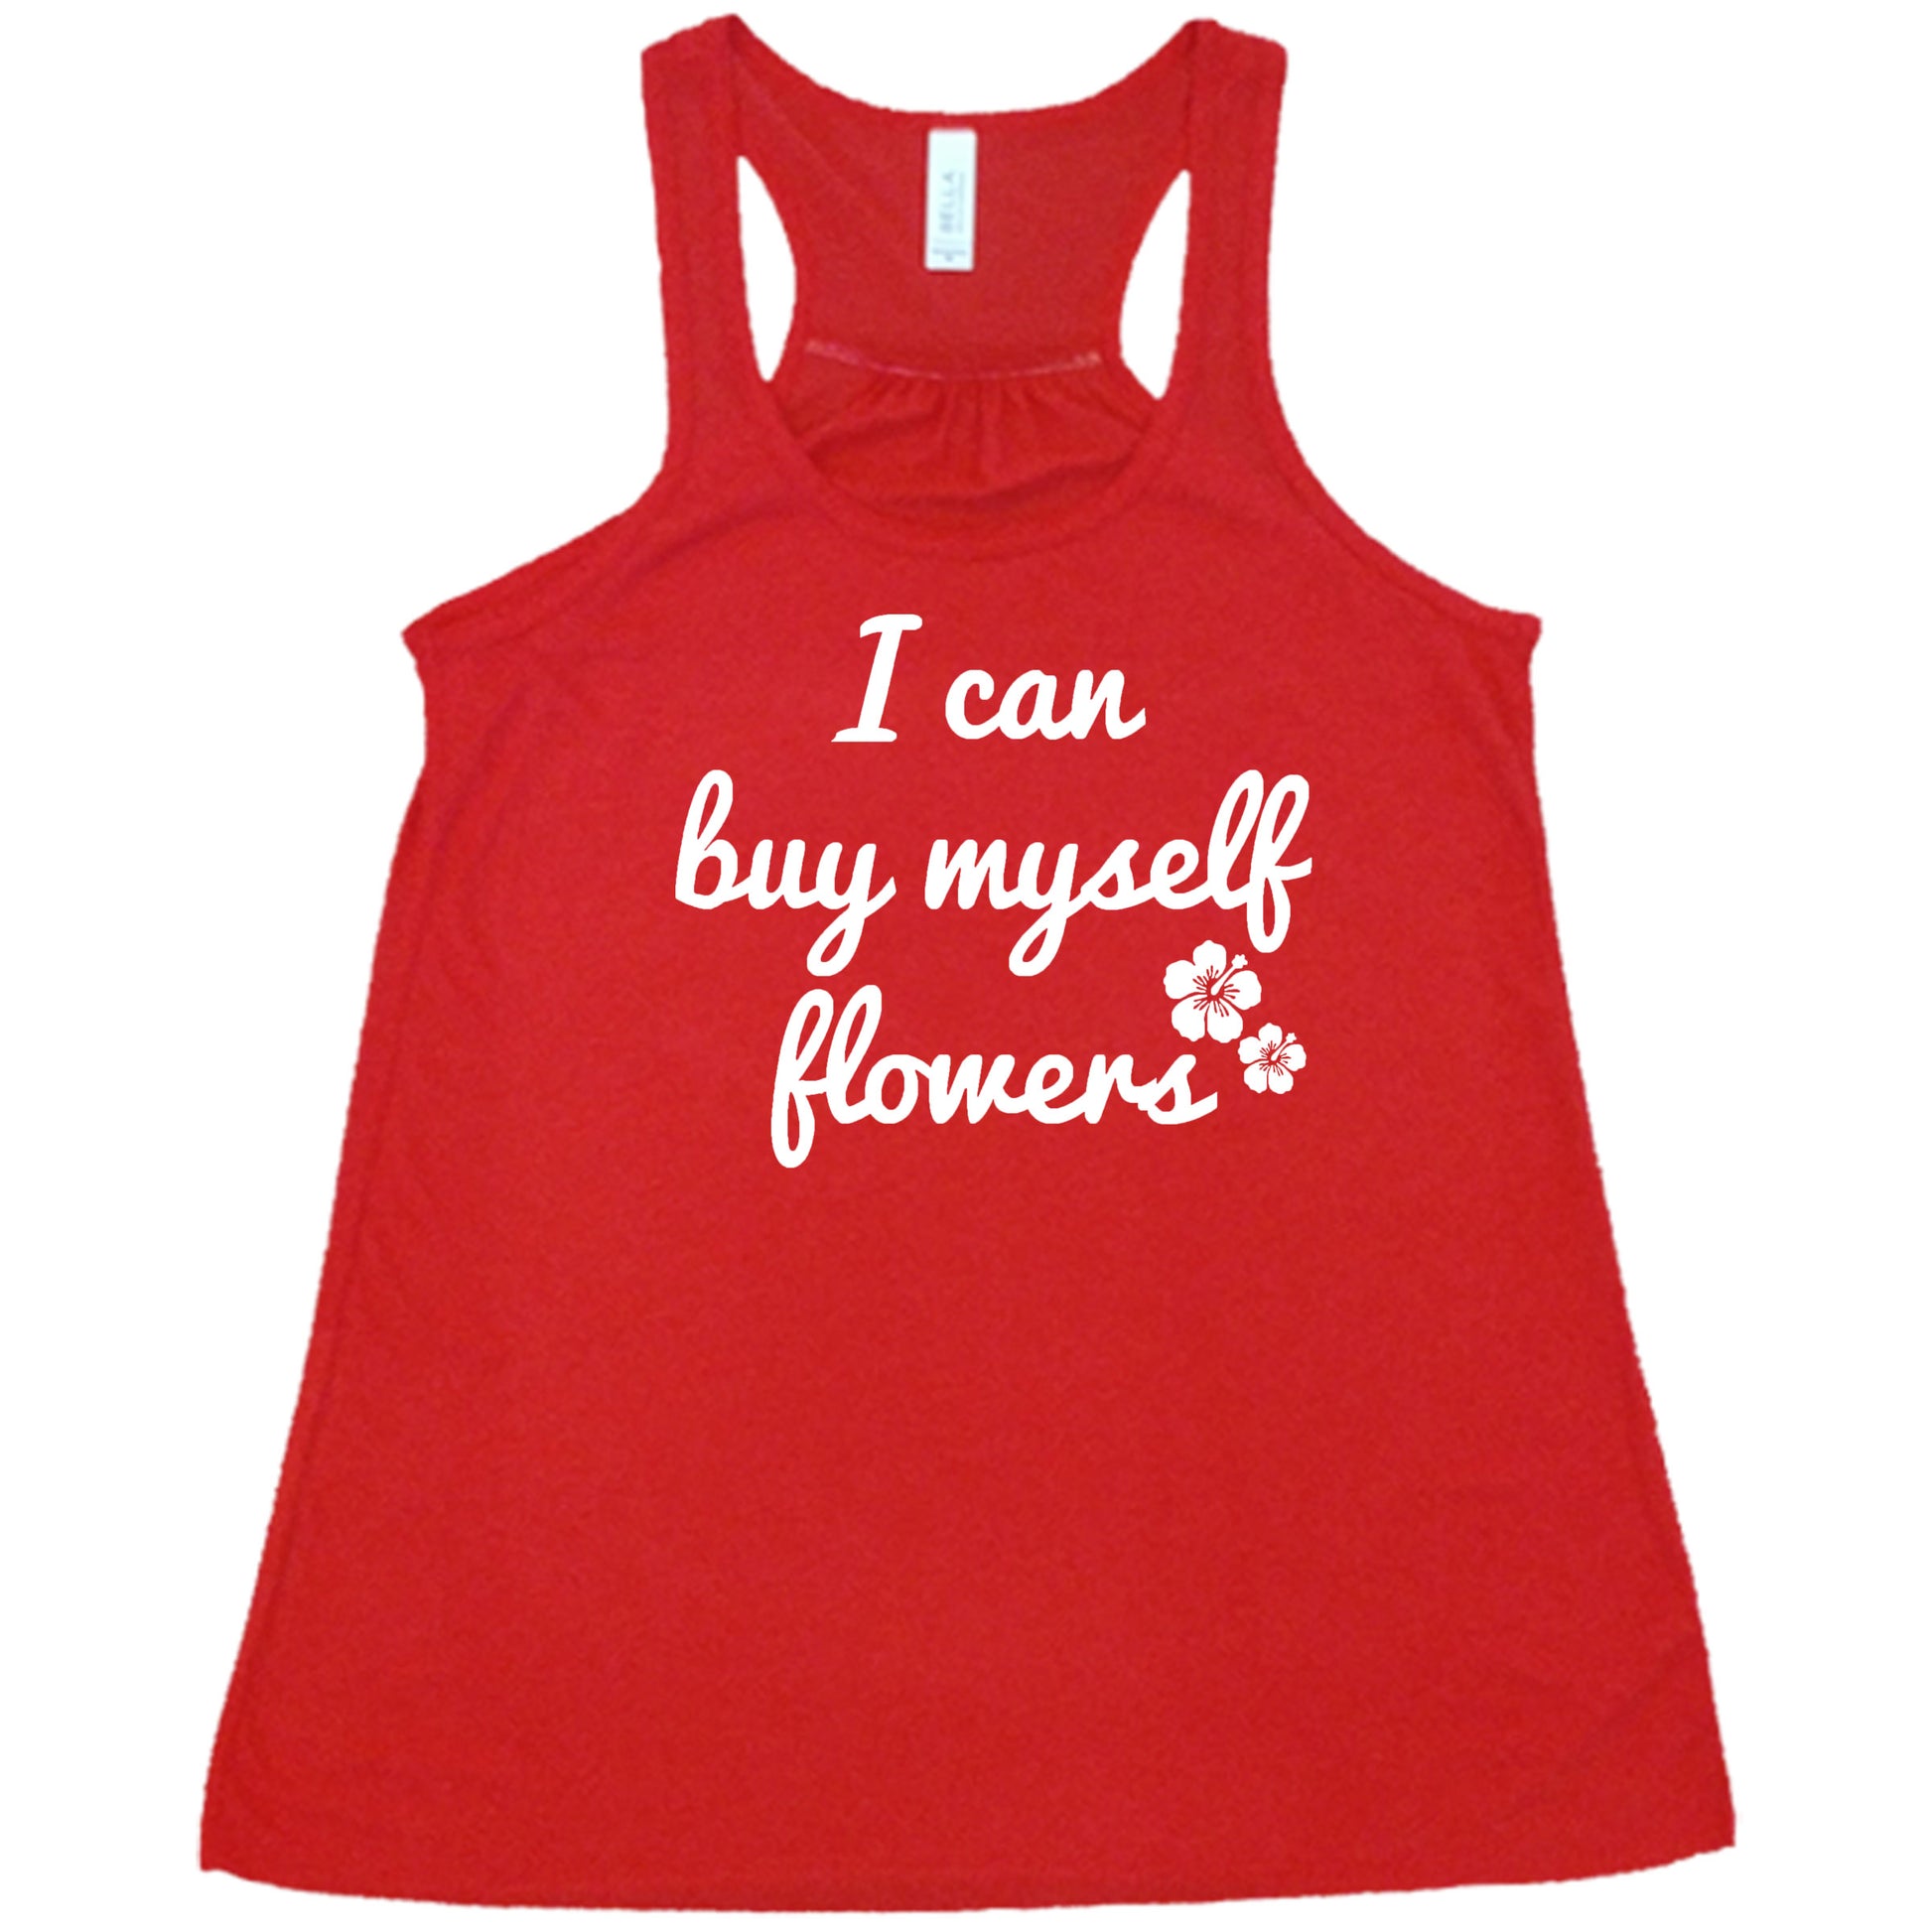 I Can Buy Myself Flowers red racerback